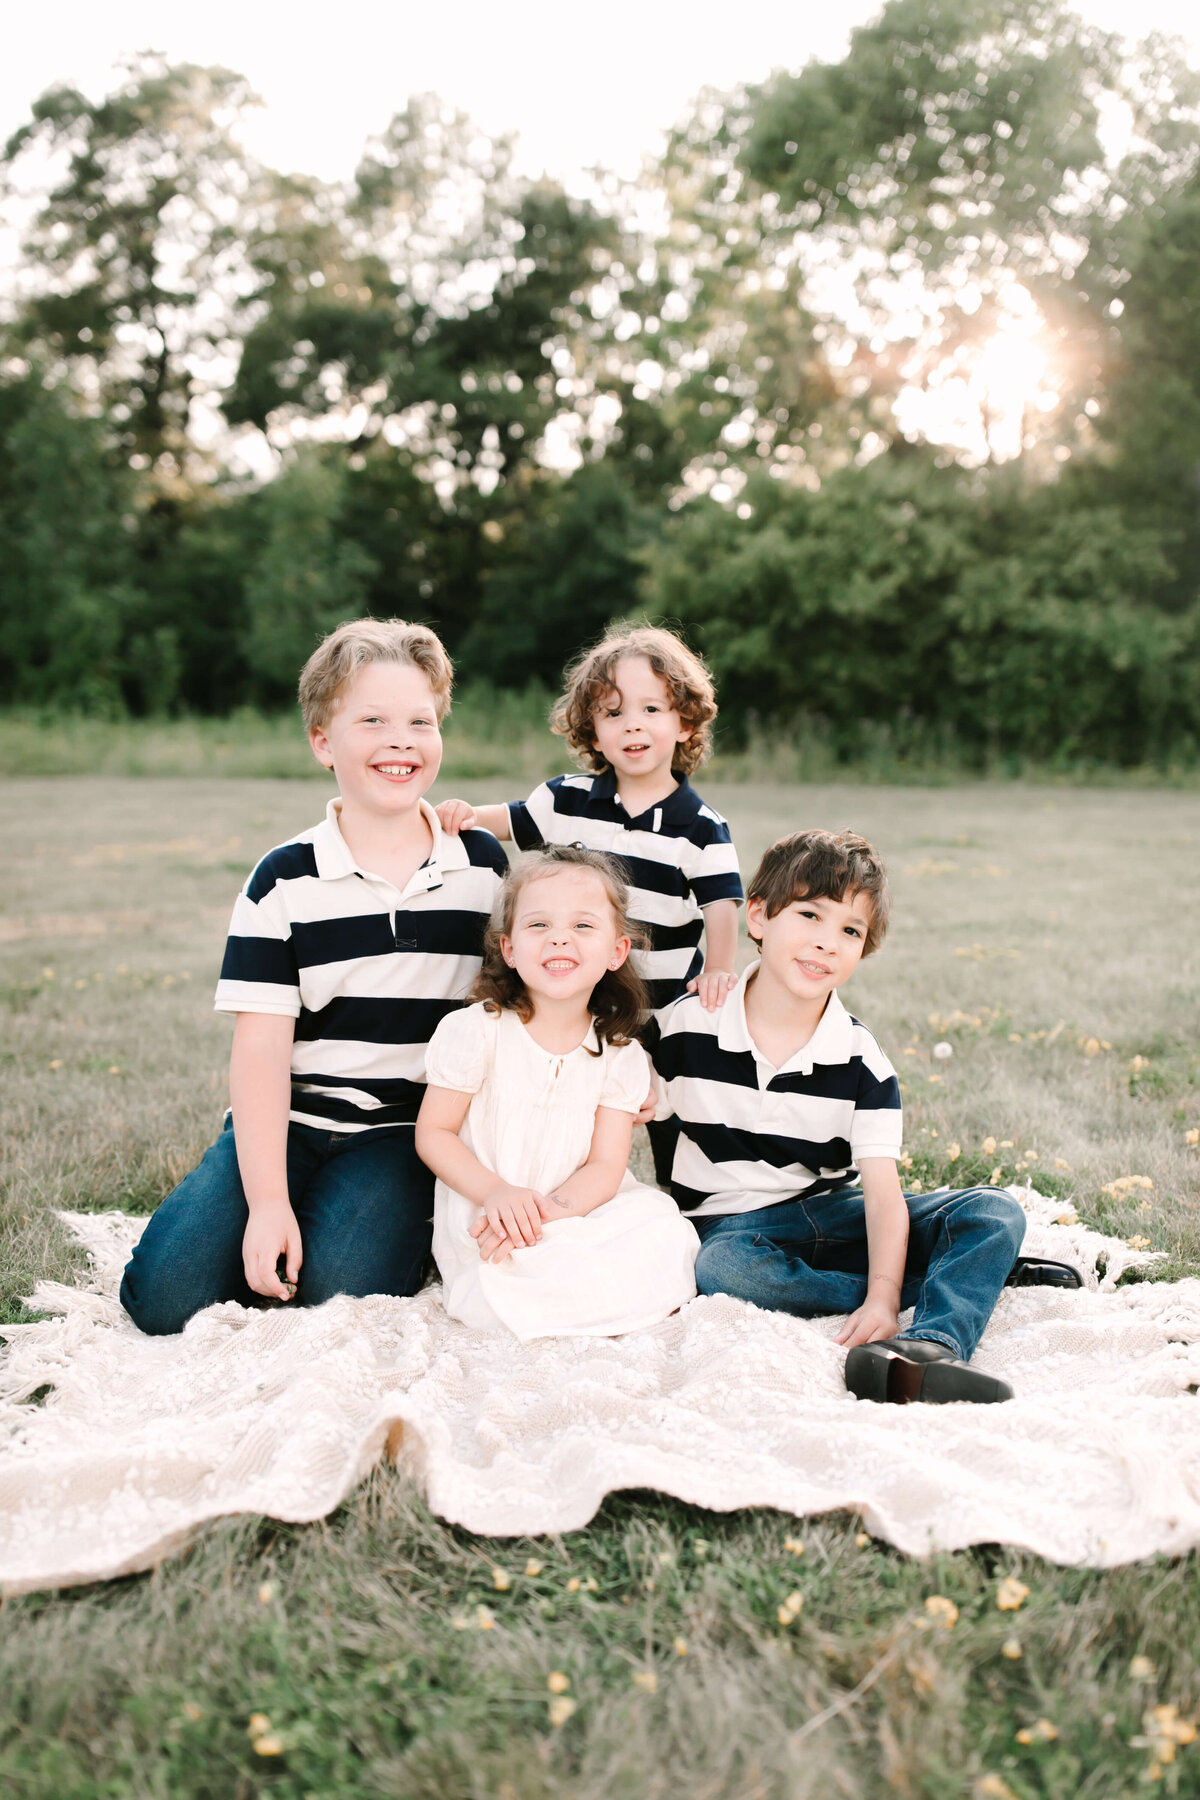 Summer-Mini-Session-Family-Photography-Woodbury-Minnesota-Sigrid-Dabelstein-Photography-Anderson-123